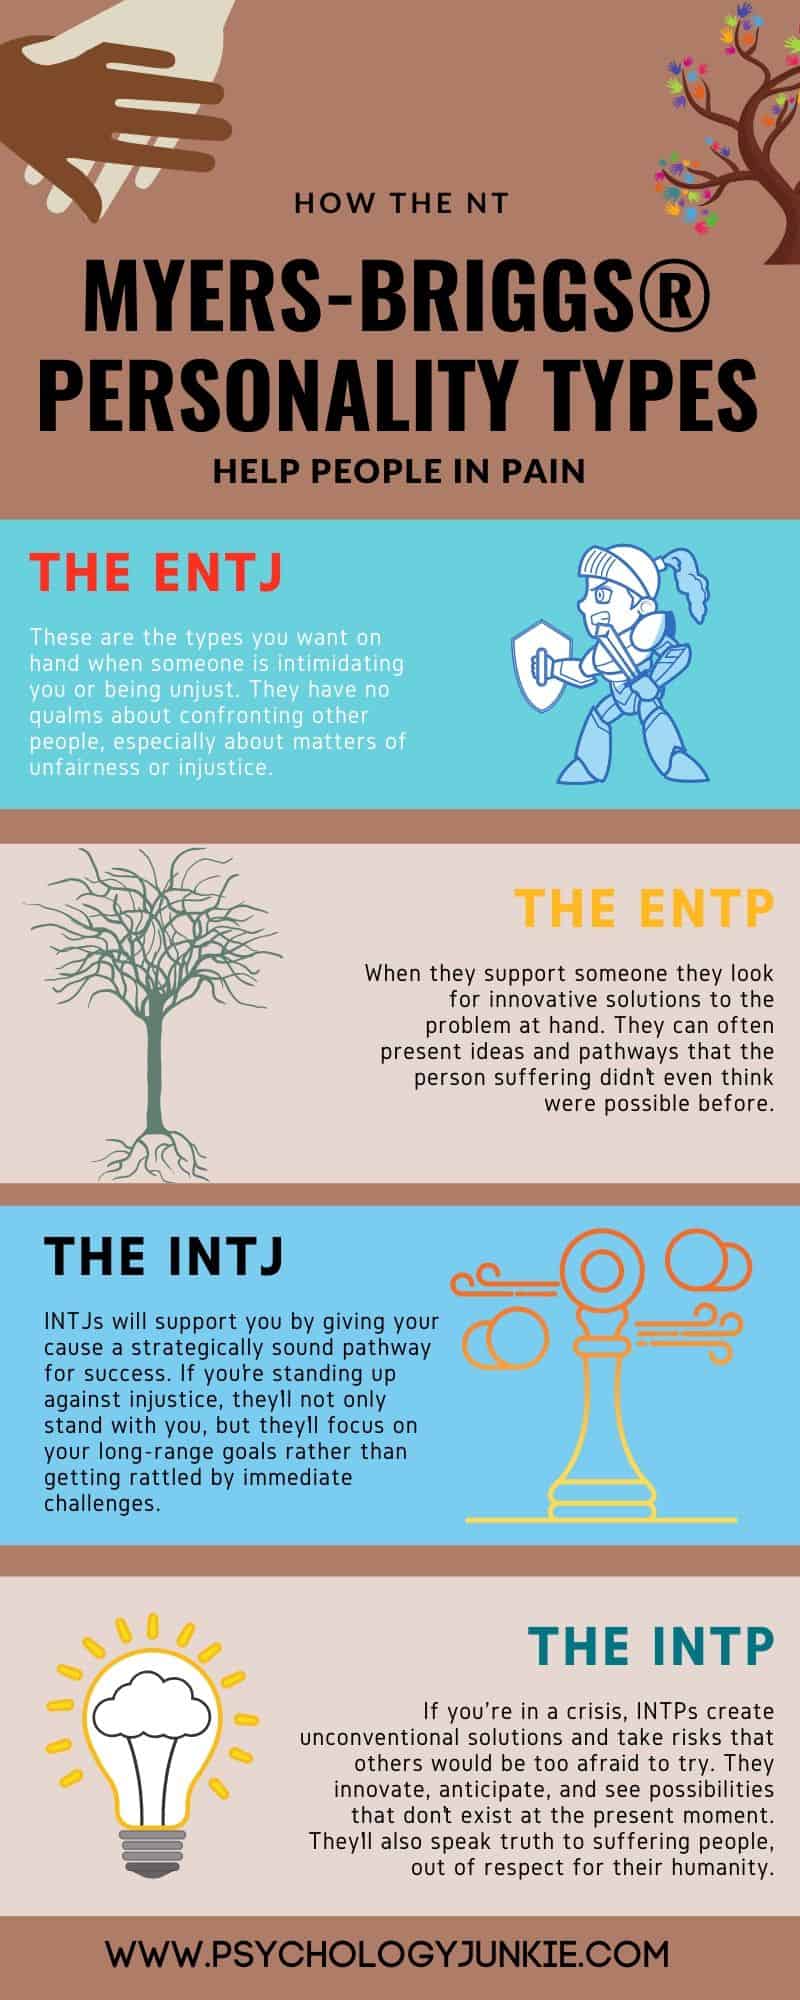 Find out how each of the Intuitive-Thinking Myers-Briggs® personality types helps those who are struggling or in pain. #MBTI #Personality #INTJ #INTP